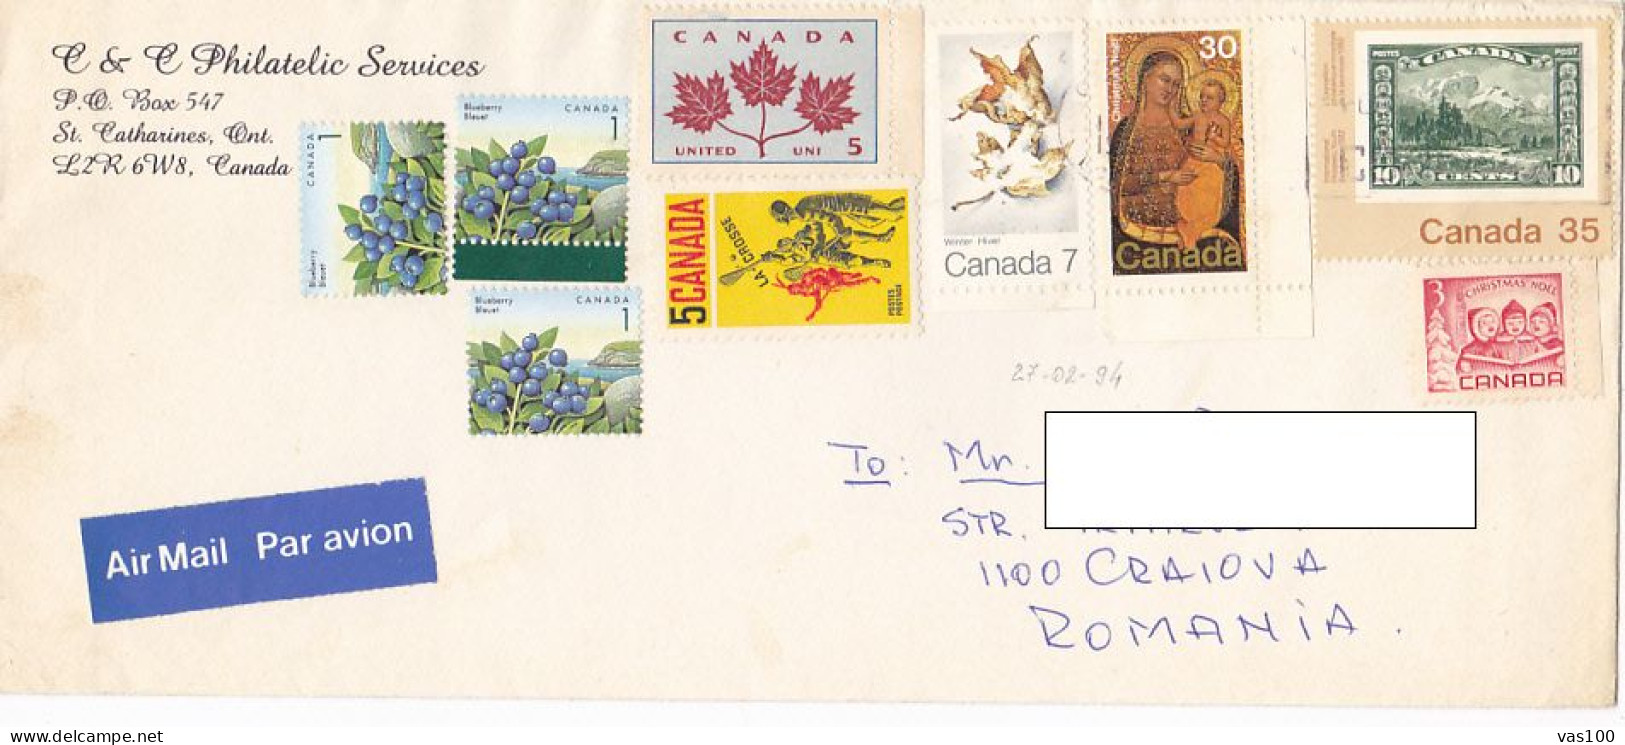 BLUEBERRY, MAPLE LEAF, LACROSSE, WINTER, CHRISTMAS, LANDSCAPE, STAMPS ON COVER, 1994, CANADA - Covers & Documents